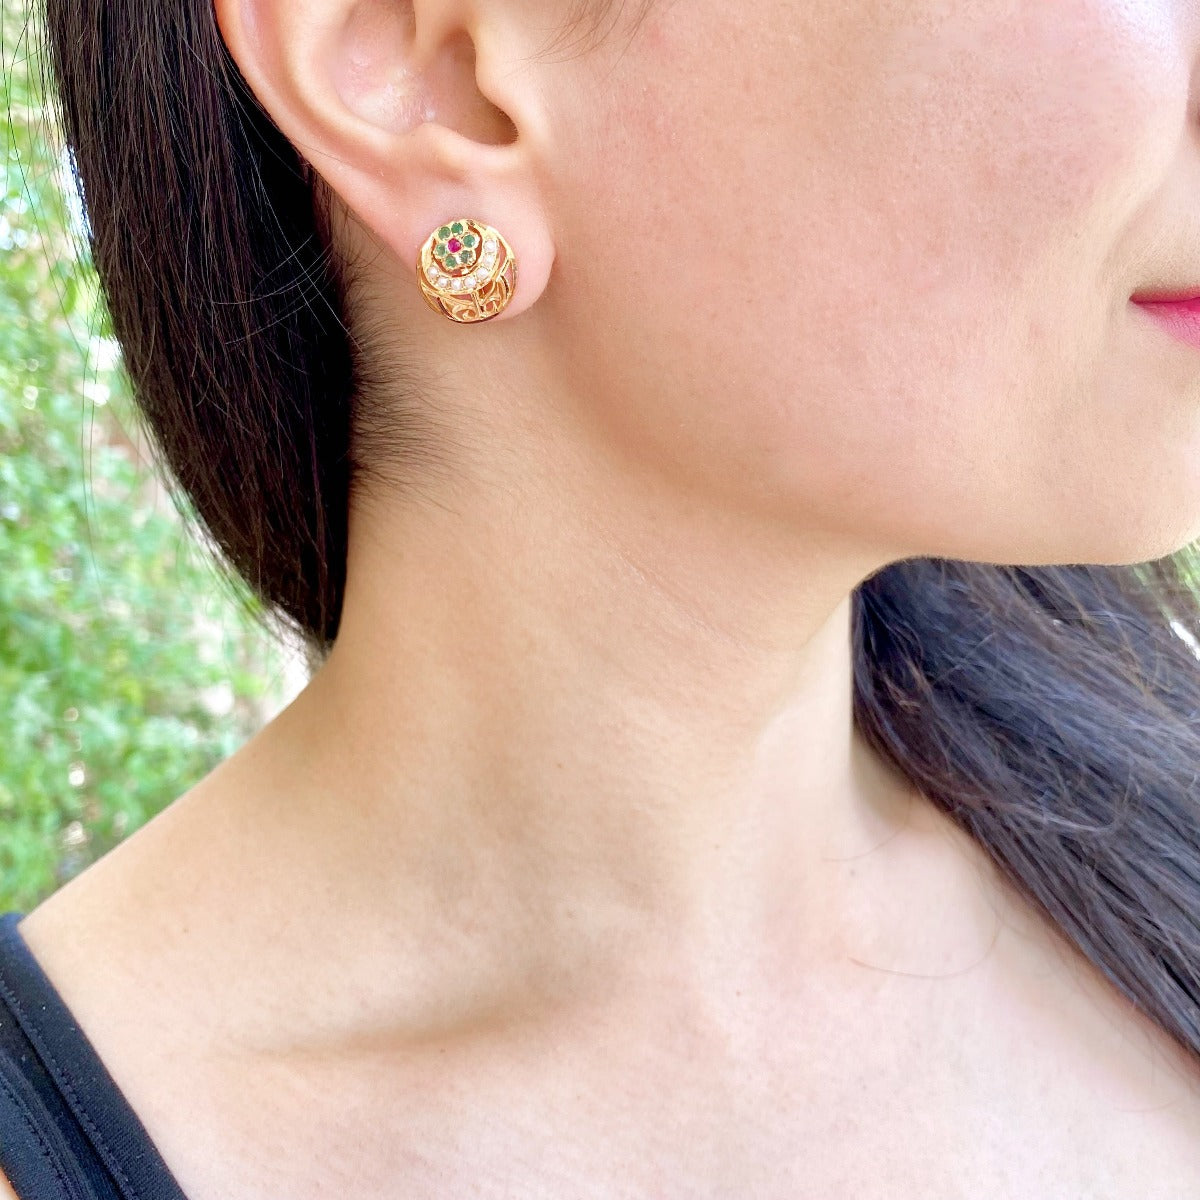 hyderabadi studs in real gold with real stones